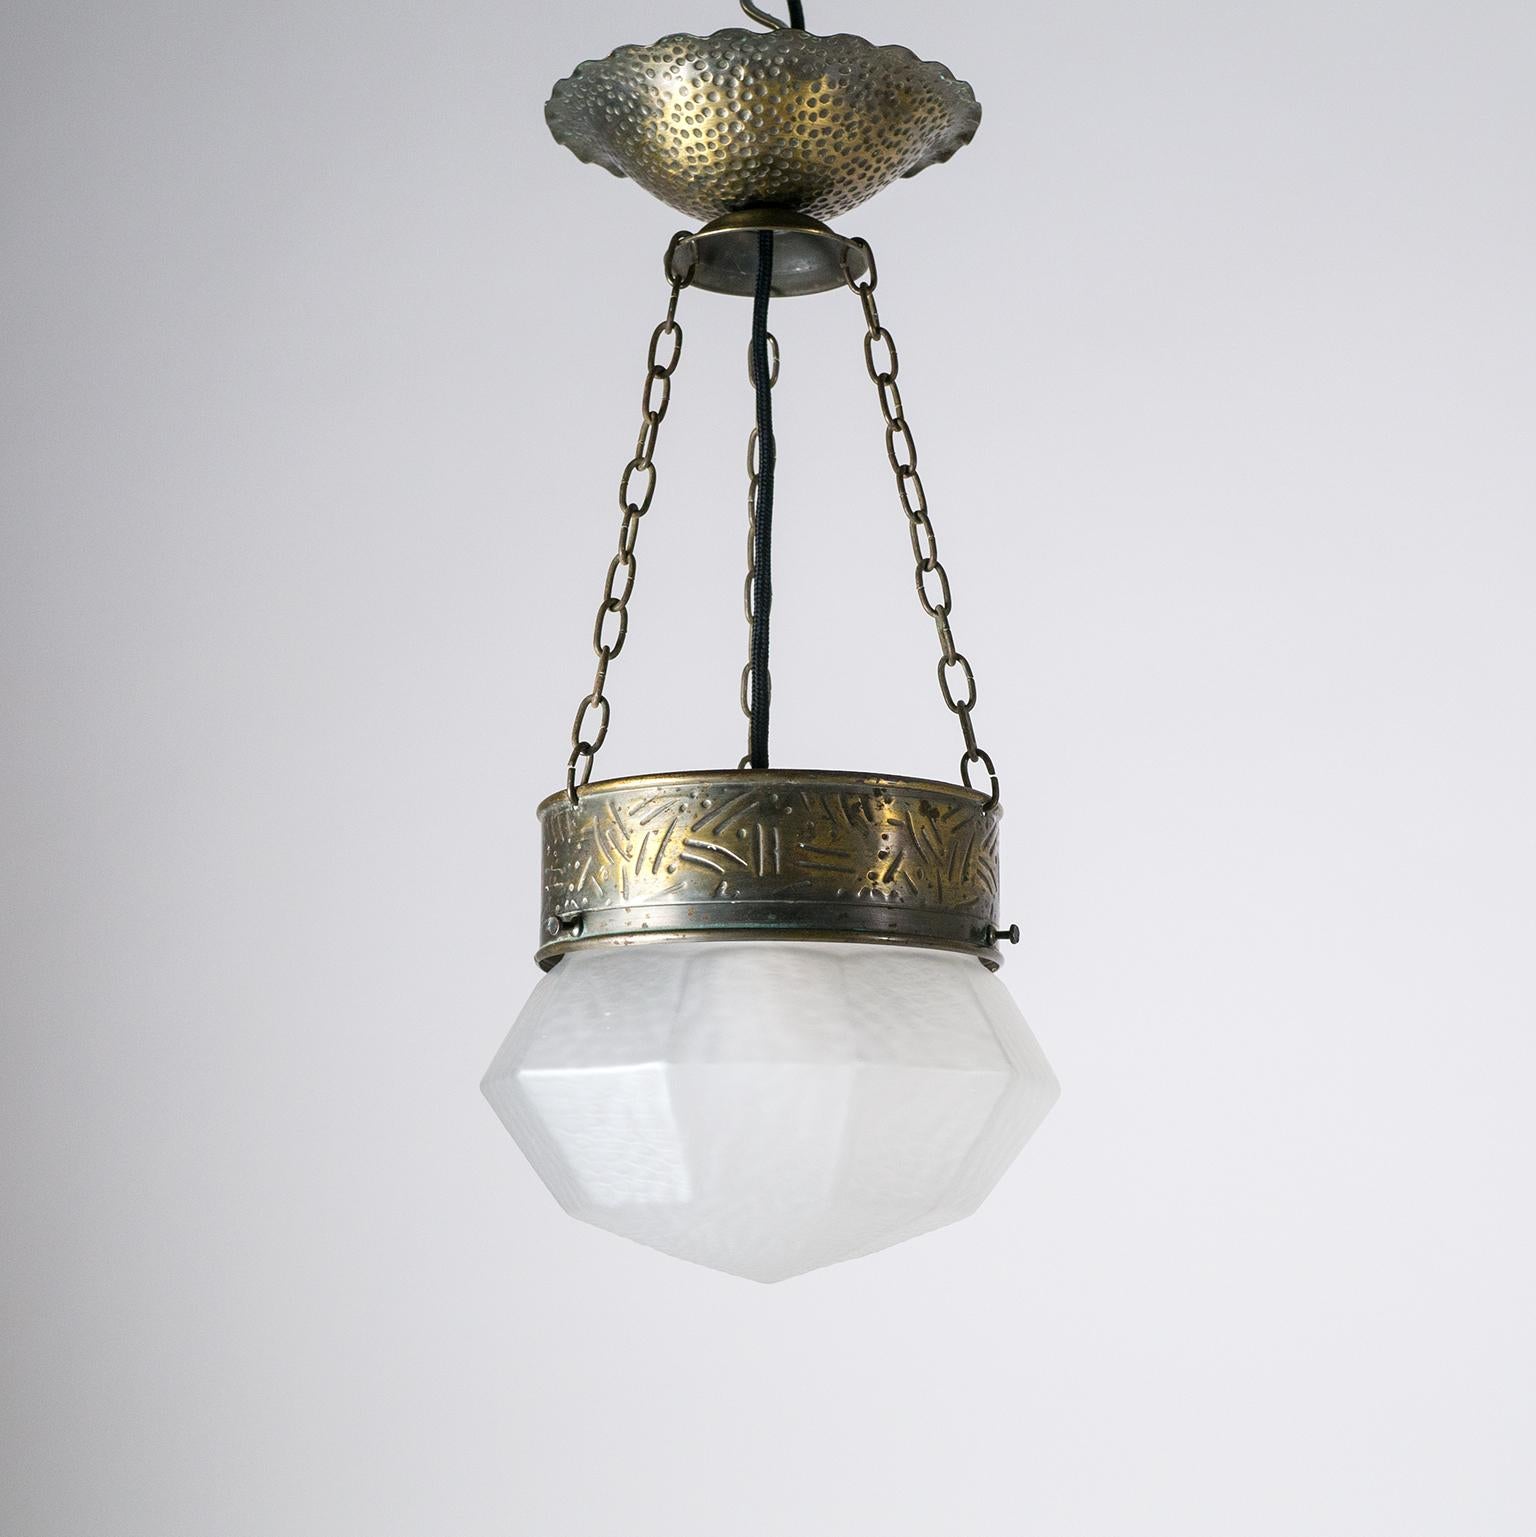 Fine early Art Deco pendant or lantern, circa 1920 (1910s). Hammered and brass-plated steel combined with a 10-sided 